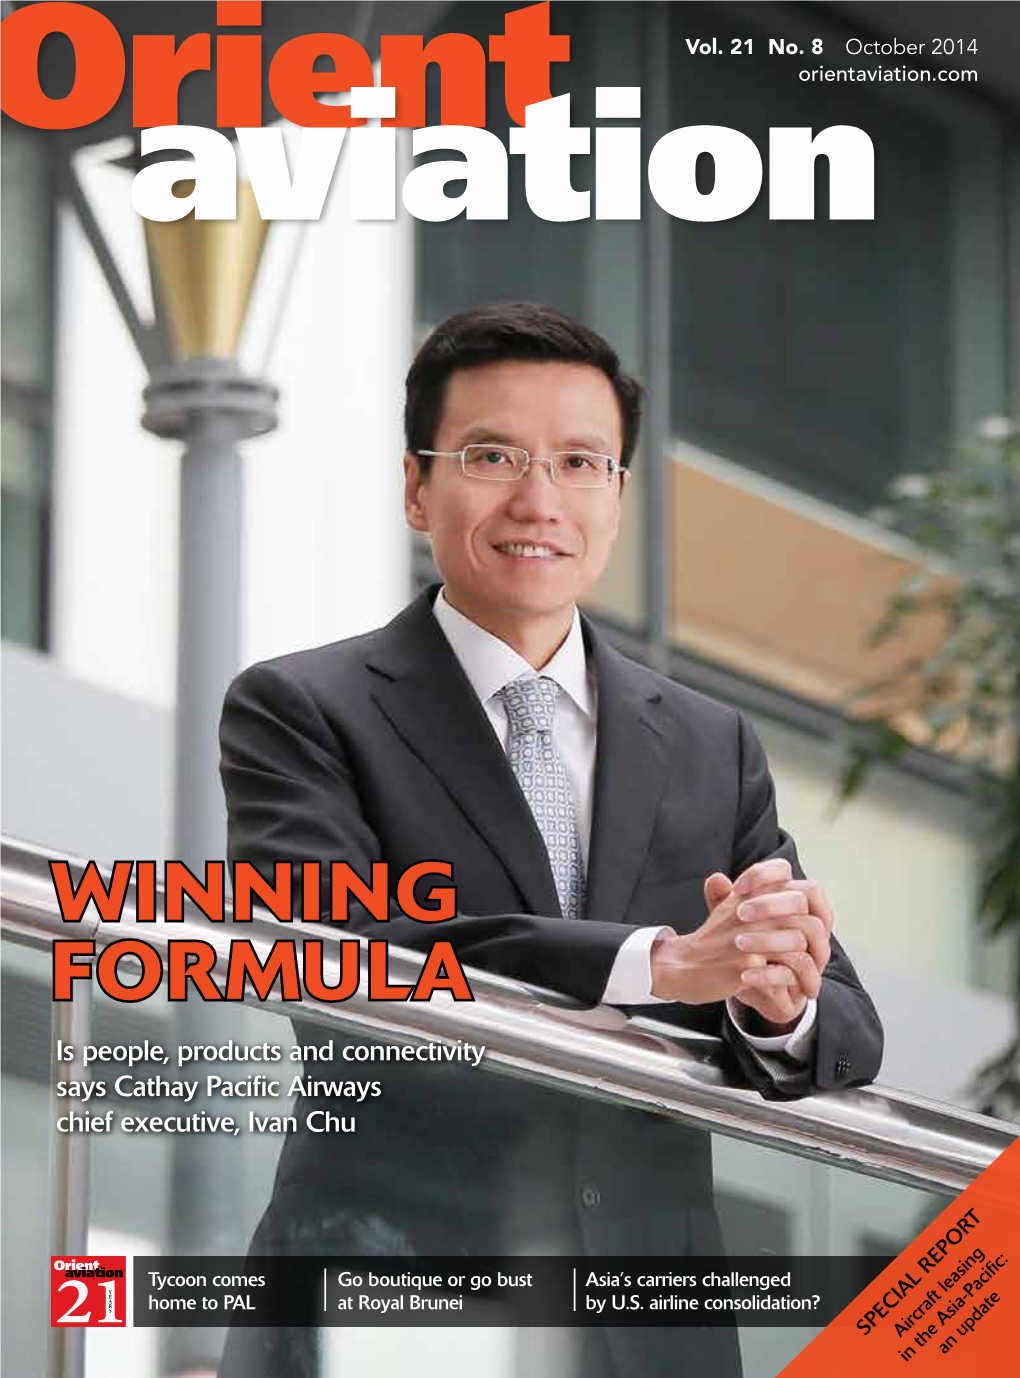 WINNING FORMULA Is People, Products and Connectivity Says Cathay Pacific Airways Chief Executive, Ivan Chu